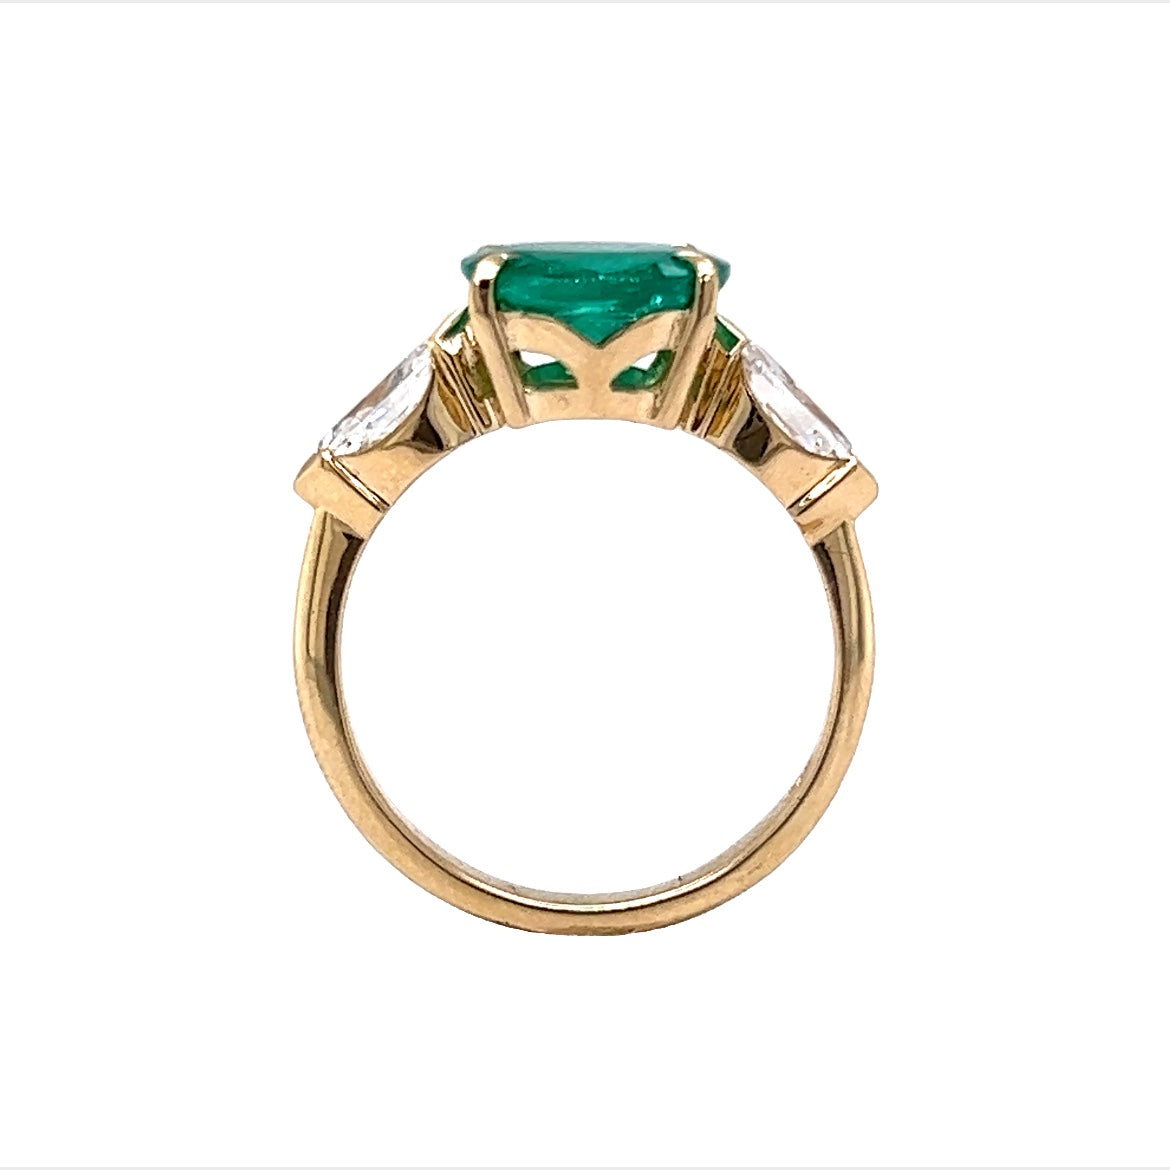 3.01 Oval Cut Emerald & Marquise Diamond Ring in 14k Yellow Gold